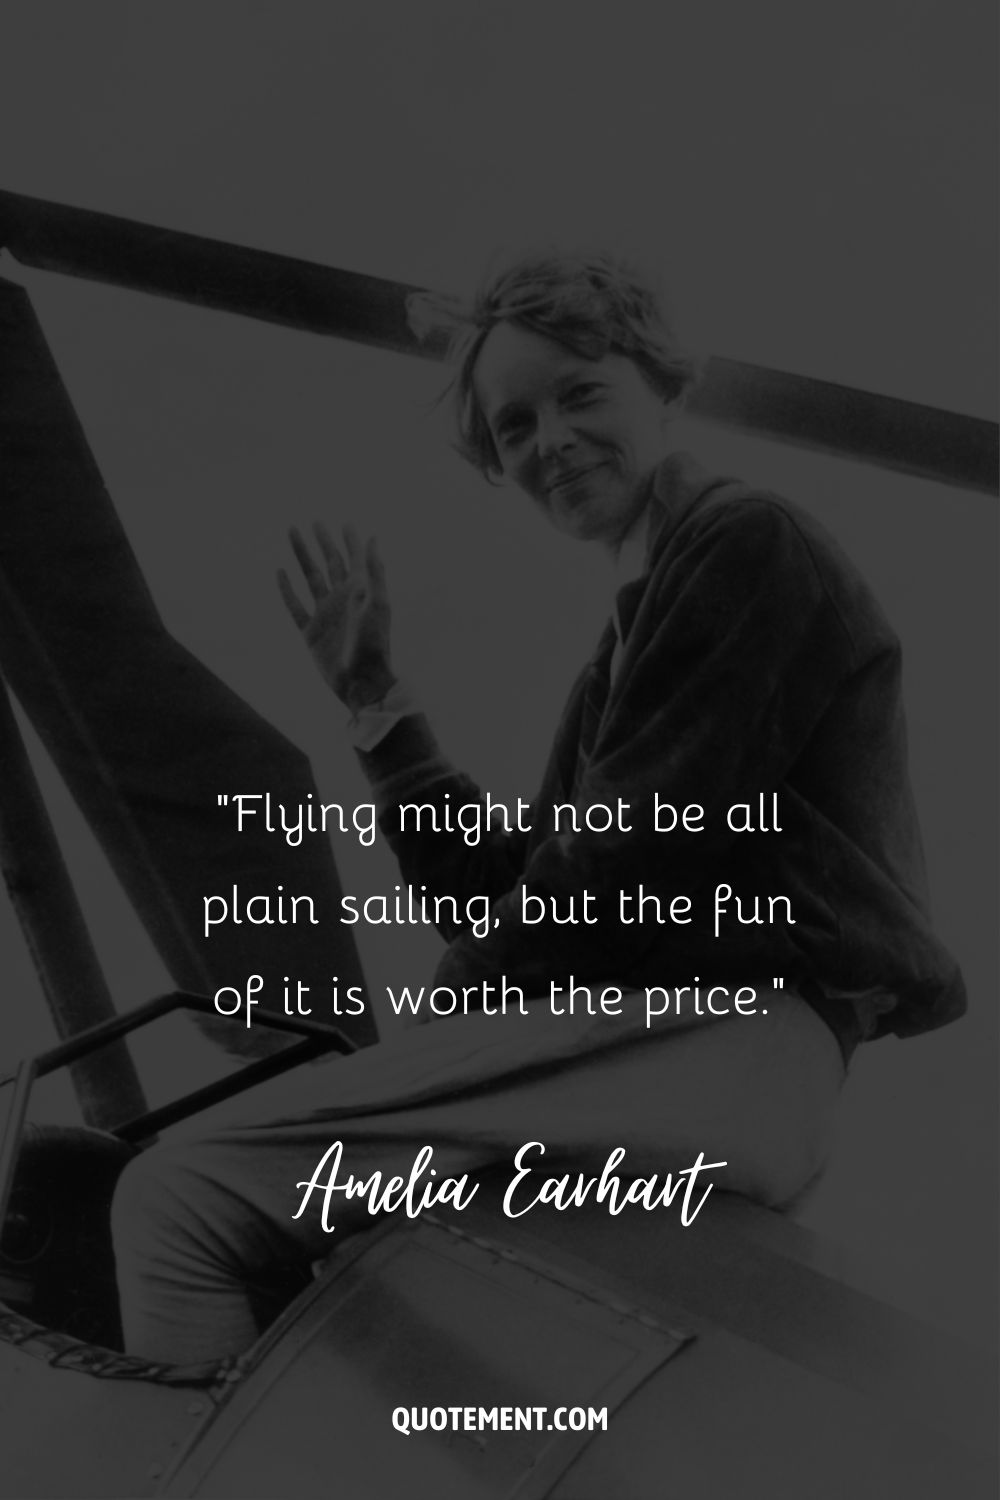 “Flying might not be all plain sailing, but the fun of it is worth the price.” ― Amelia Earhart, The Fun of It